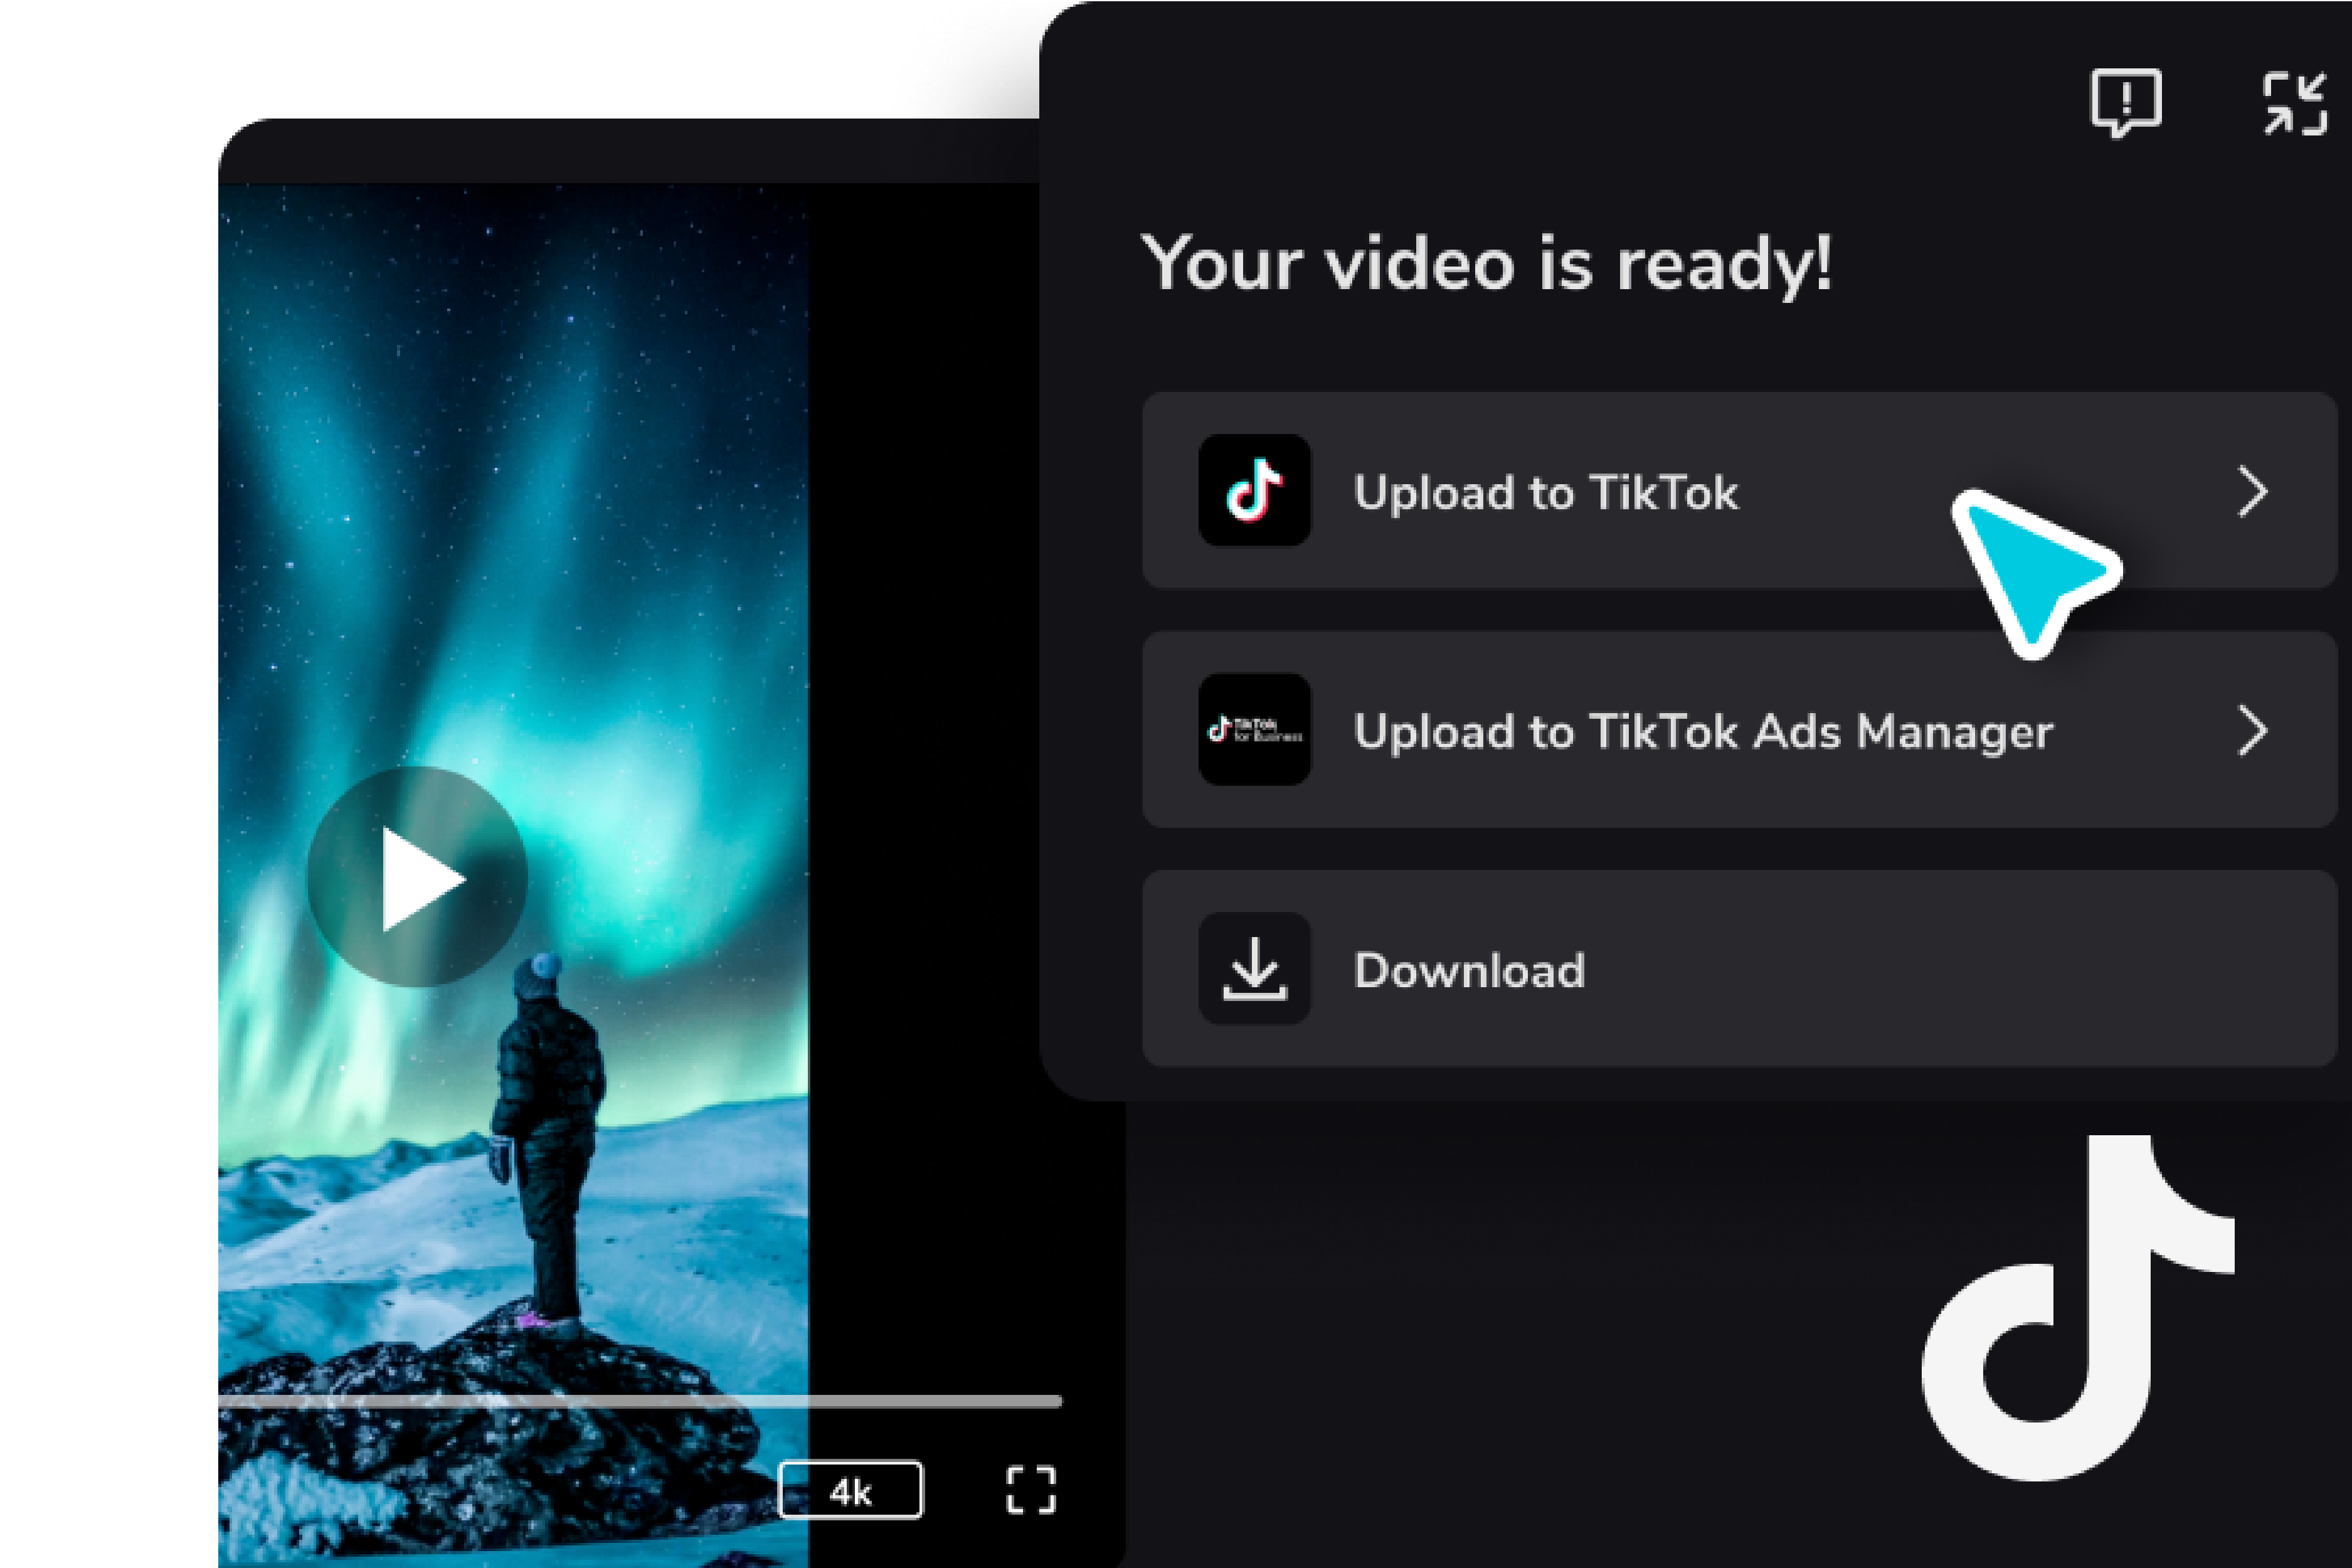 Step 4. Upload videos to TikTok directly or download without watermarks